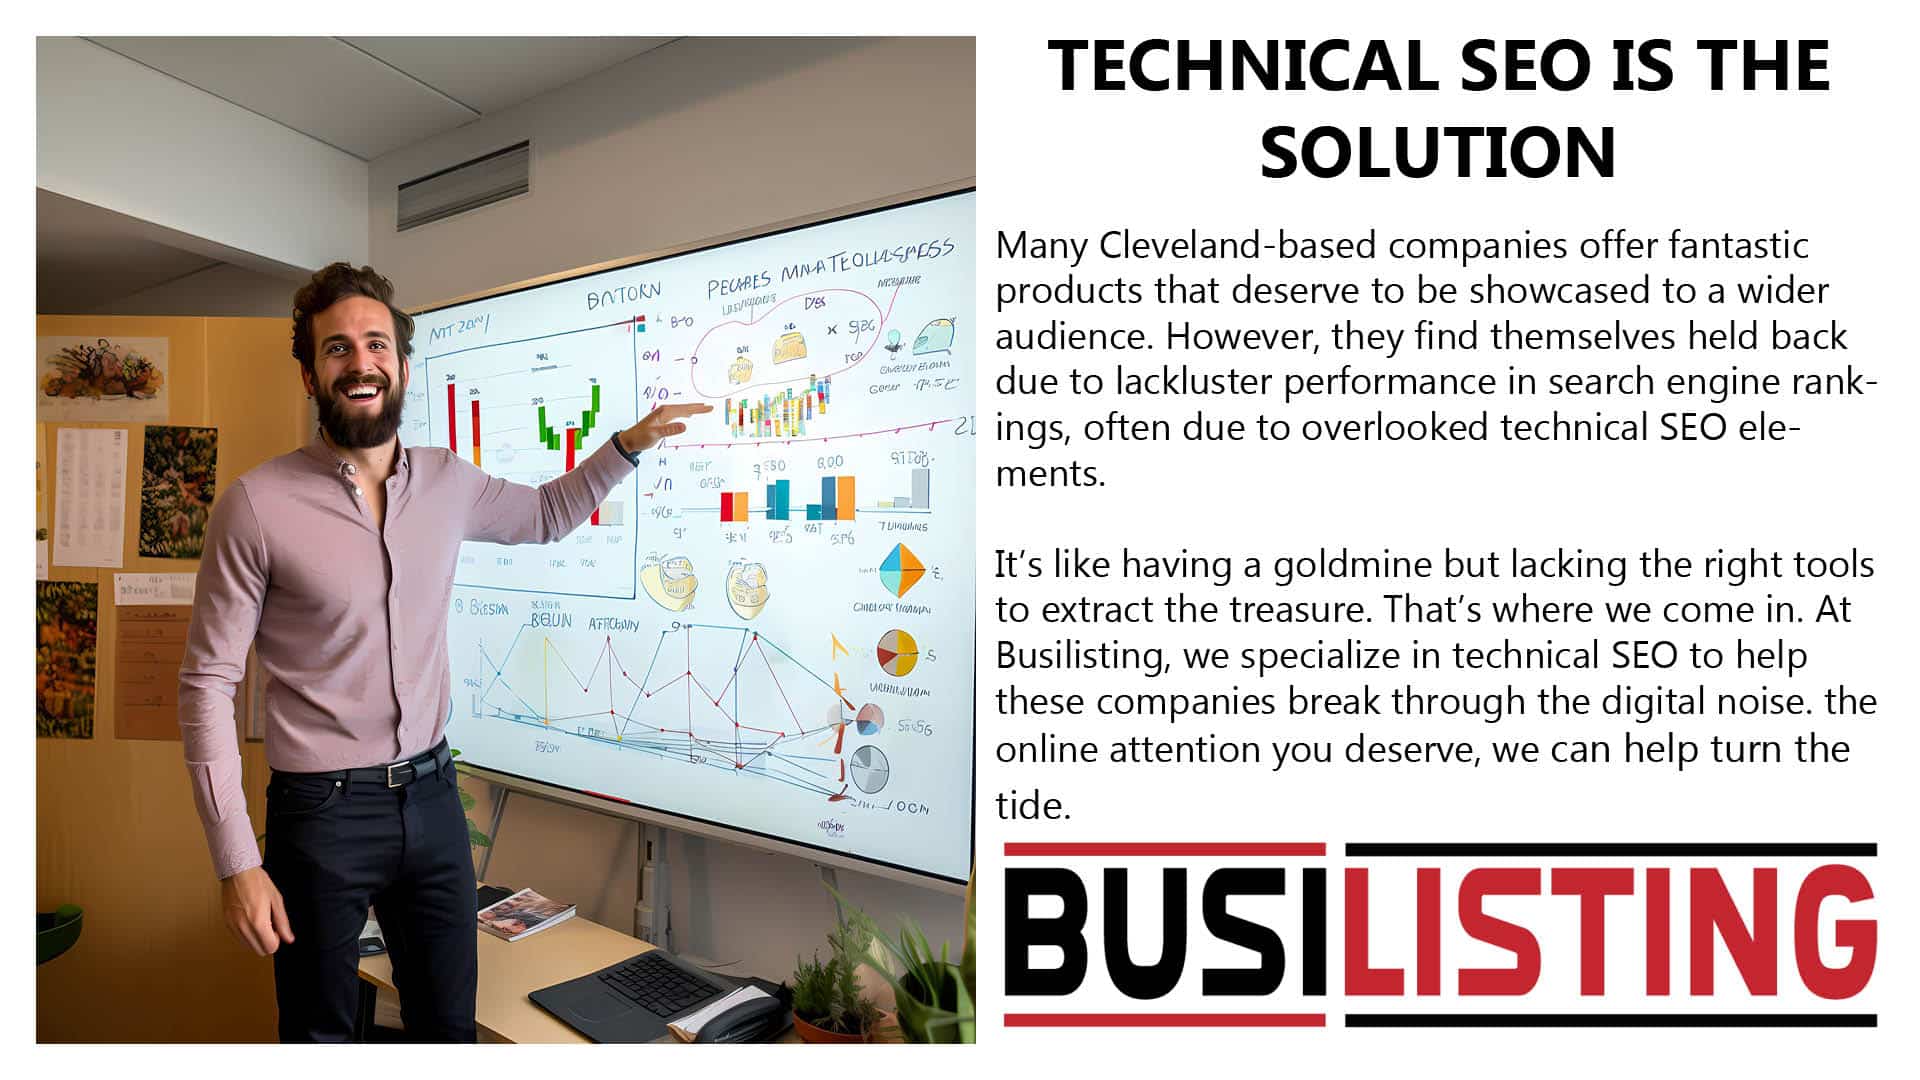 When you need Technical SEO in Cleveland contact Busilisting